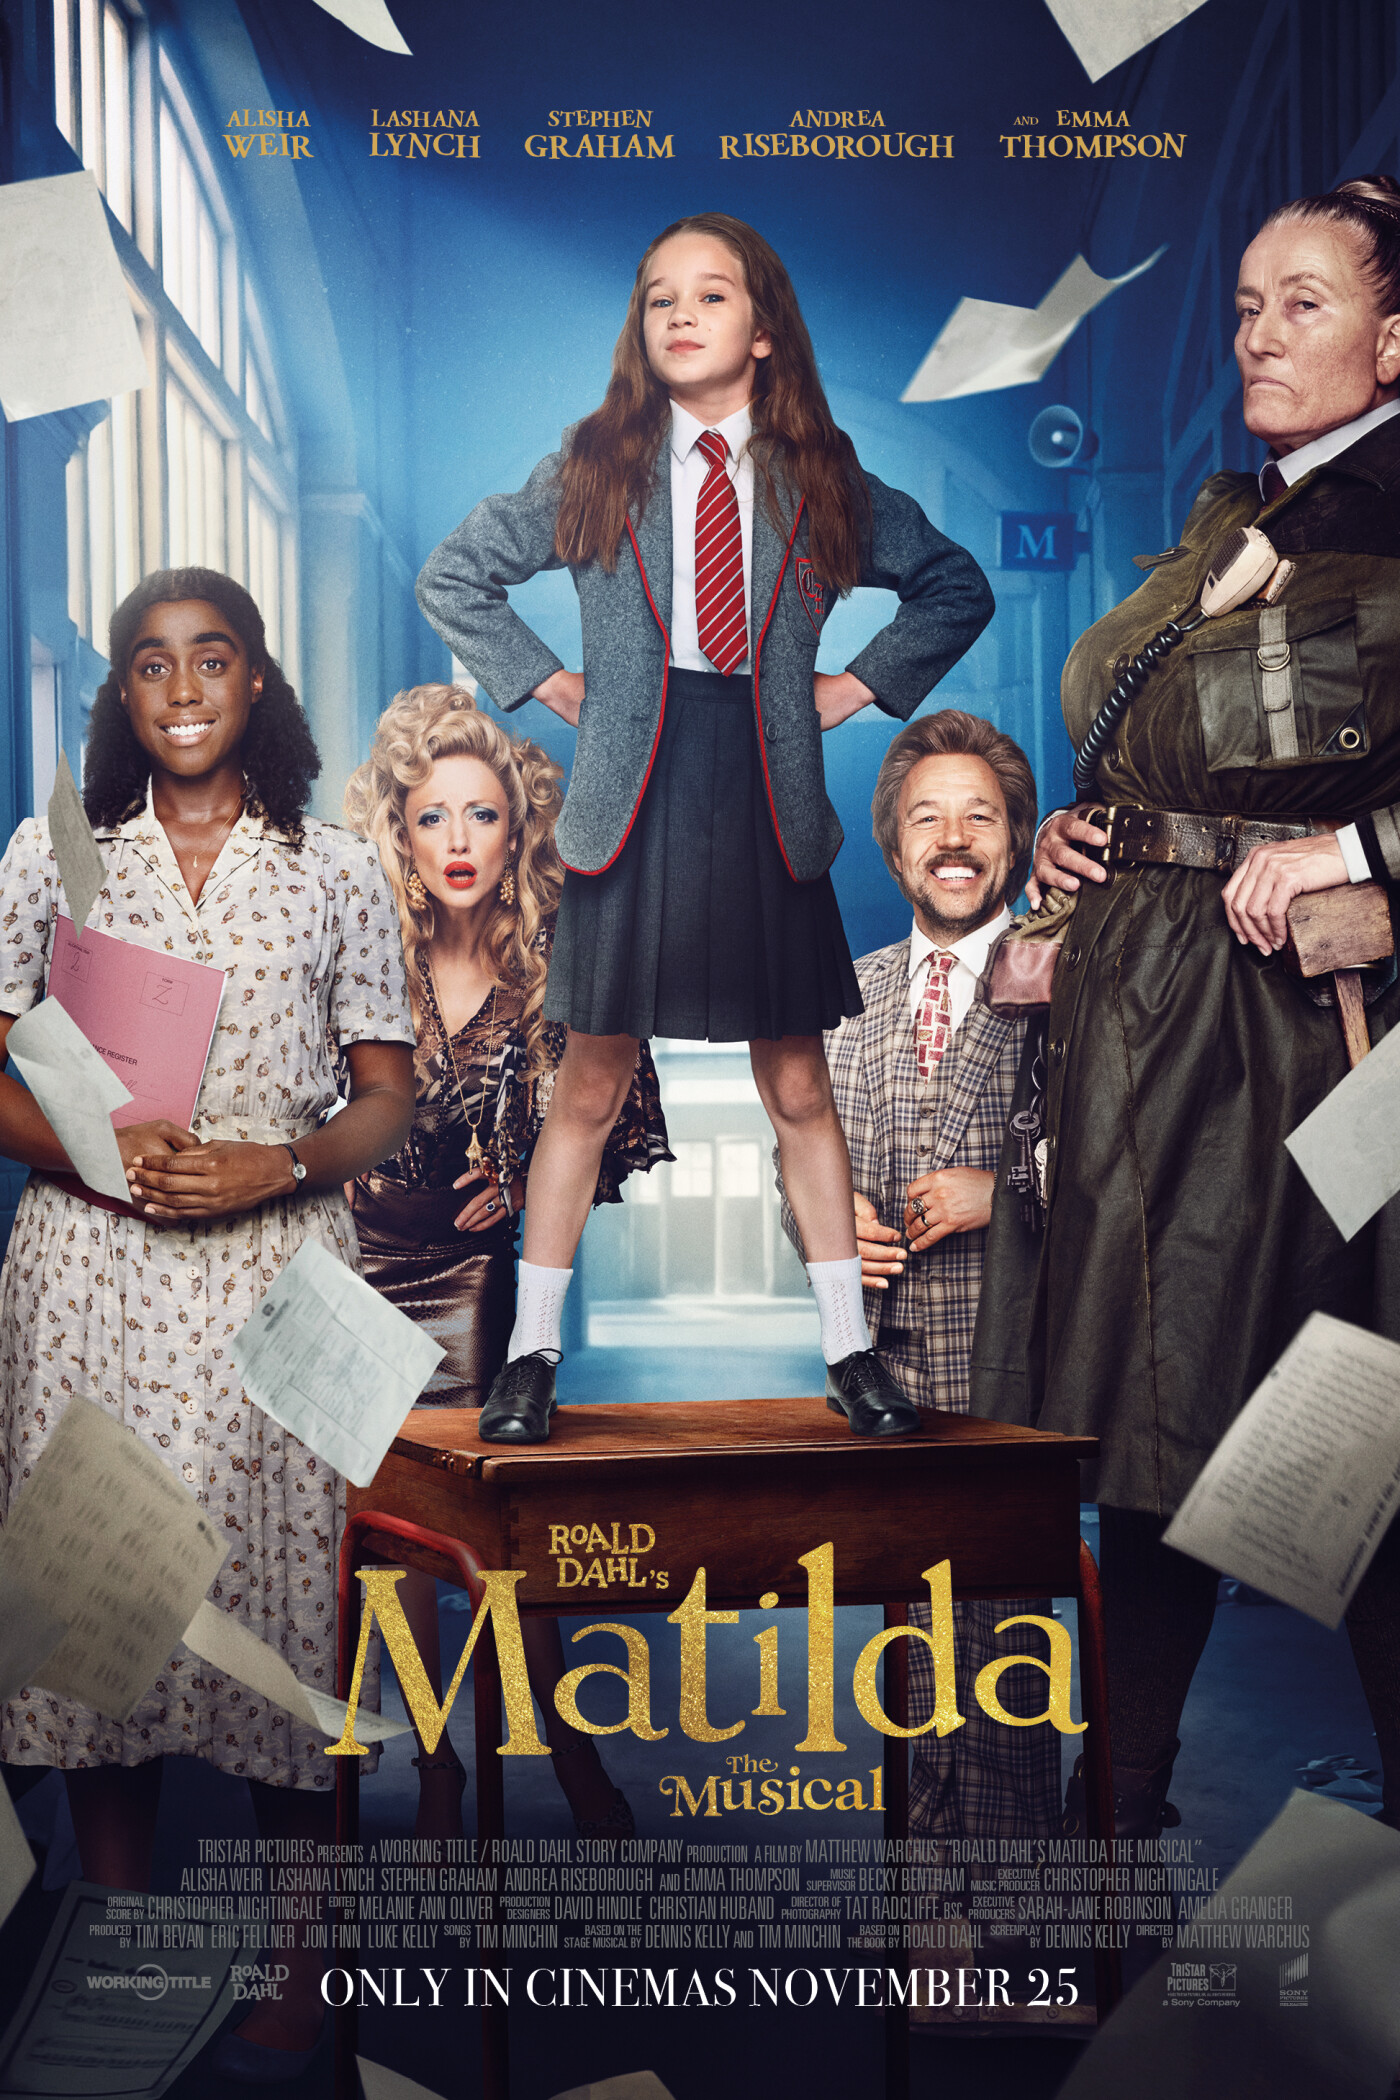 Roald Dahl S Matilda The Musical Sony Pictures United Kingdom